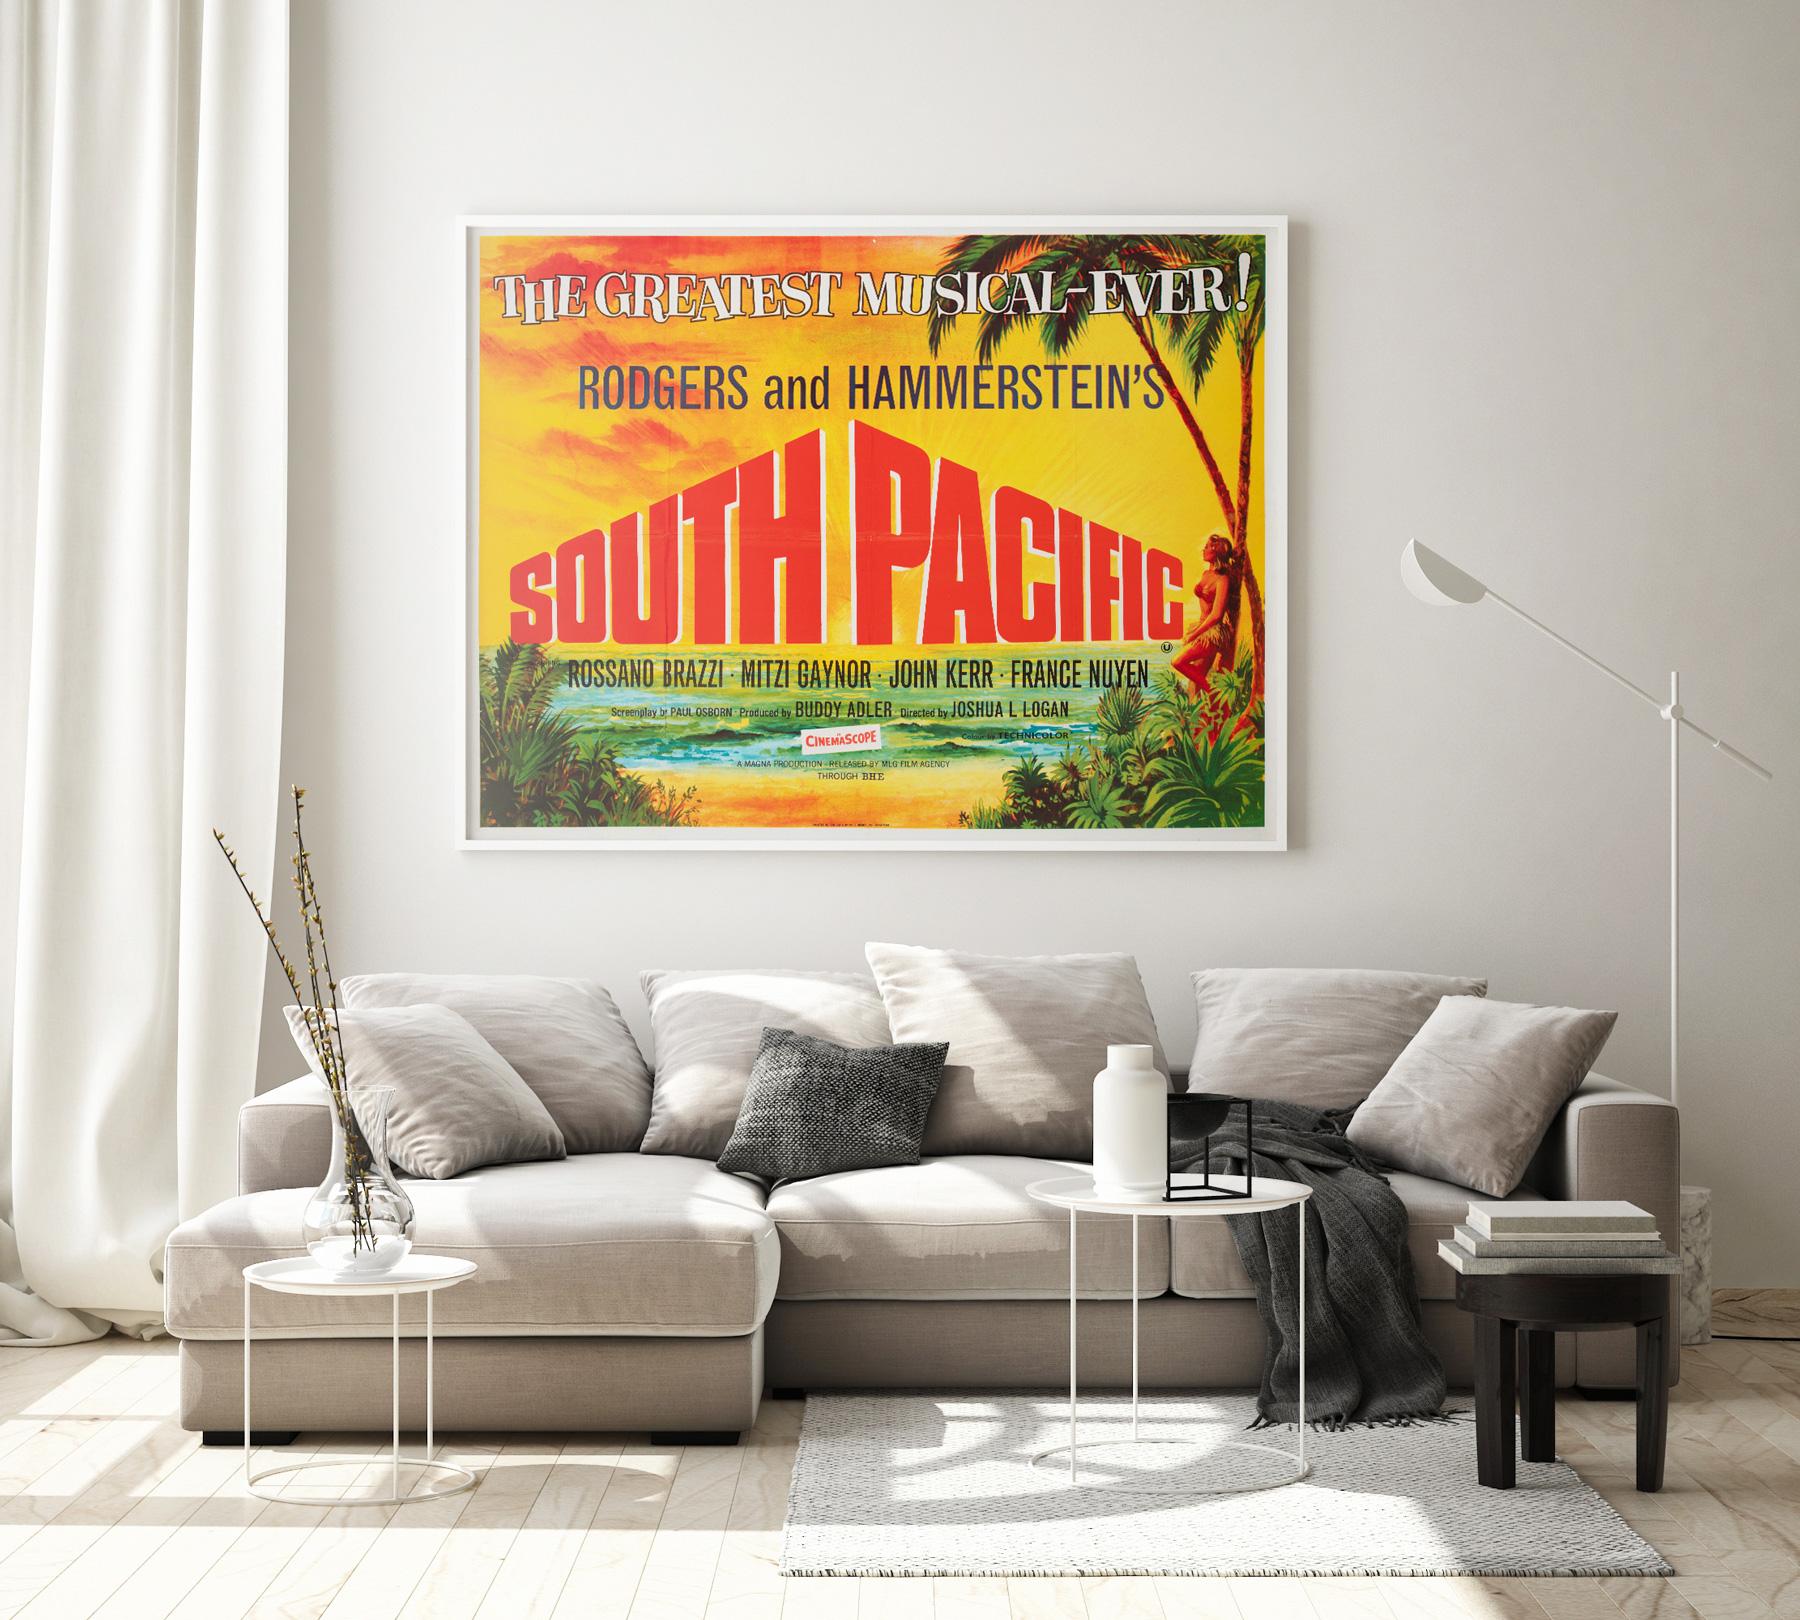 We adore the 60s re-release for classic musical South Pacific. Tom Chantrell's design is more akin to a travel poster than a film poster, and it certainly makes us want to visit! Sumptuous colours.

Tom Chantrell (1916 - 2001) arguably the greatest